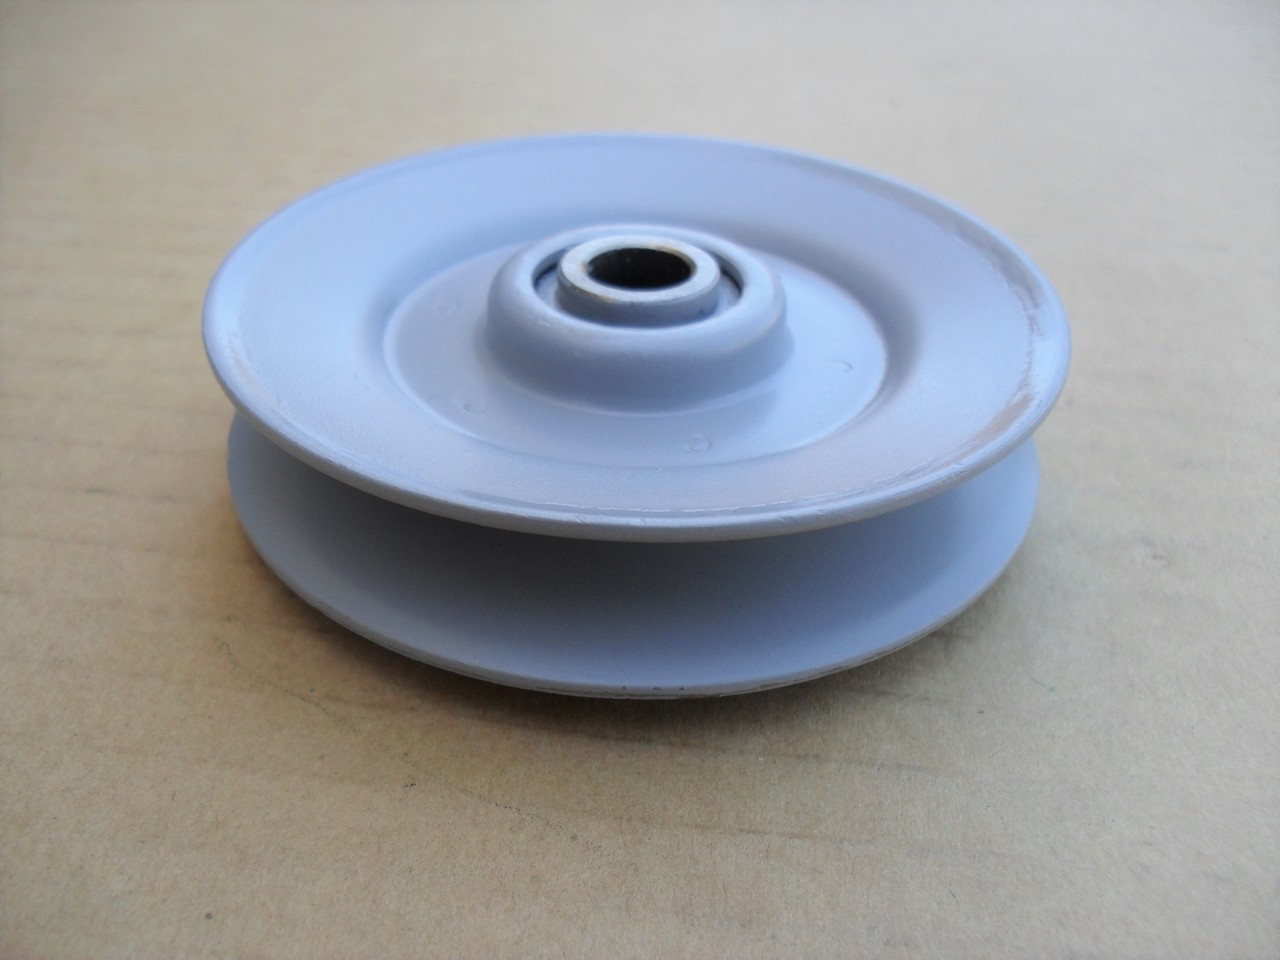 Idler Pulley for Massey Ferguson 834336M1 Made In USA, Height: 5/8" ID: 3/8" OD: 3-1/16"